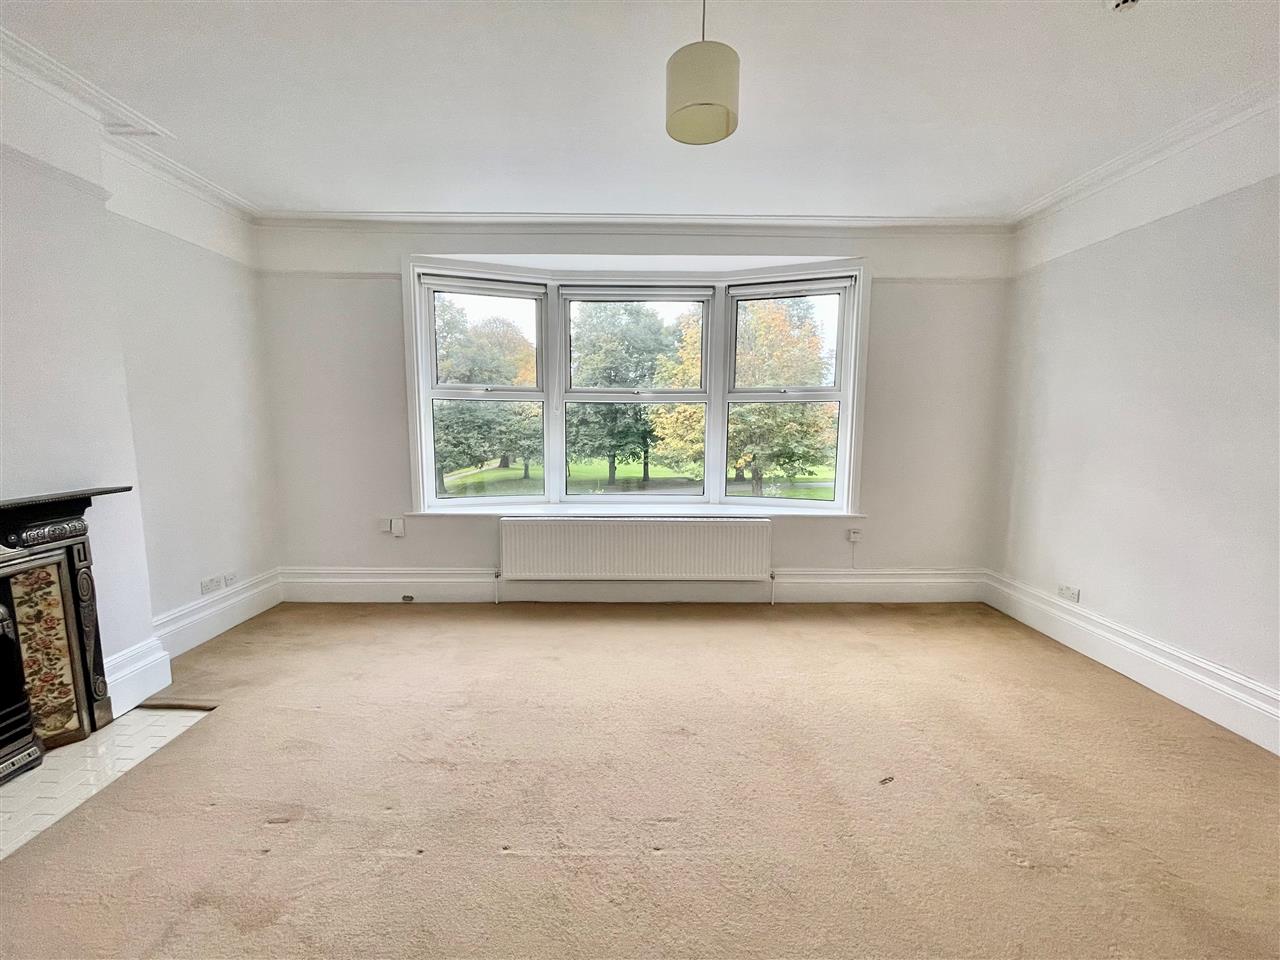 Burghleys are delighted to offer this massive unfurnished two double bedroom split level flat above commercial premises with private roof terrace! The reception is exceptionally large with a great view overlooking the park and the kitchen is fitted with a wash/dryer and dish washer, with a ...